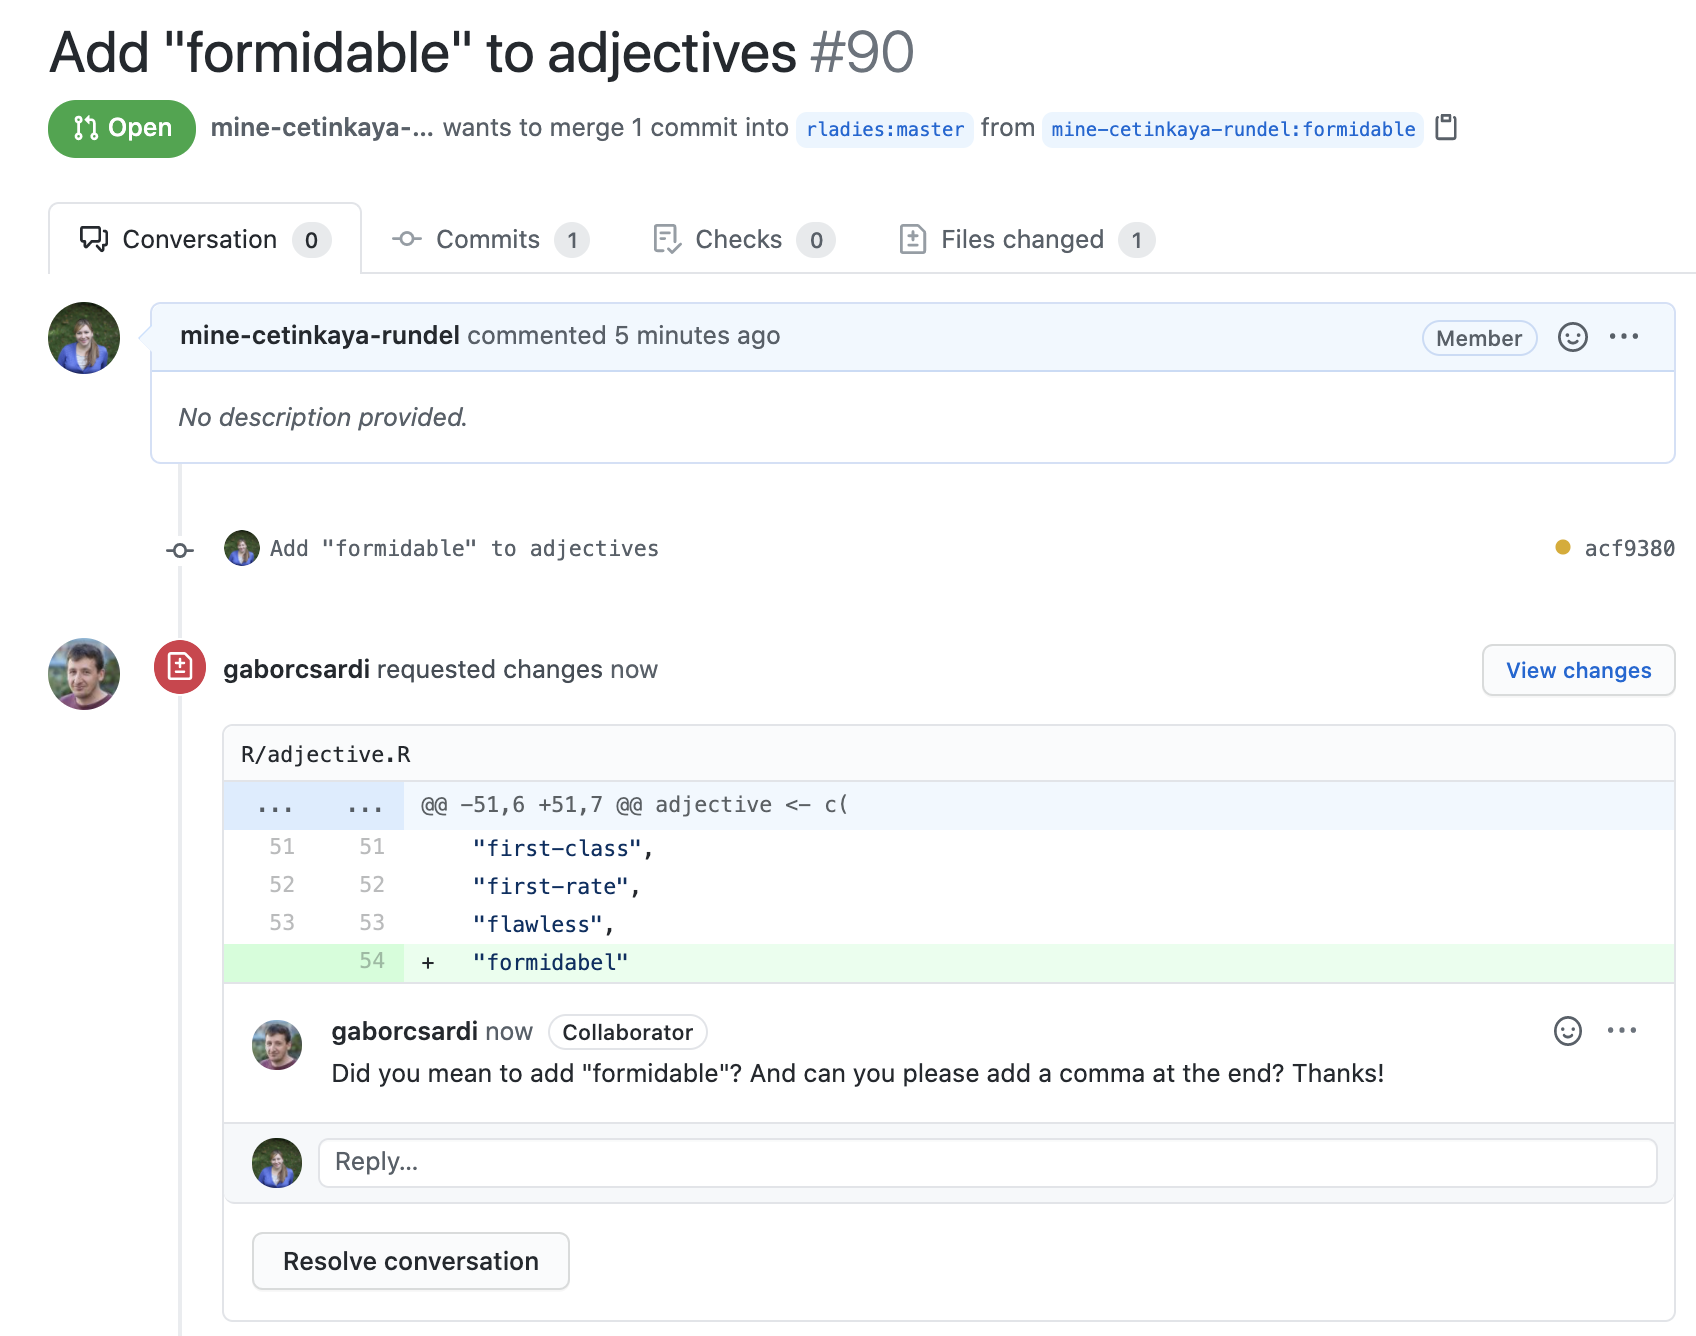 A screenshot of the comments section on the pull request. A comment from a collaborator on the new line says "Did you mean to add 'formidable'? And can you please add a comma at the end? Thanks!"